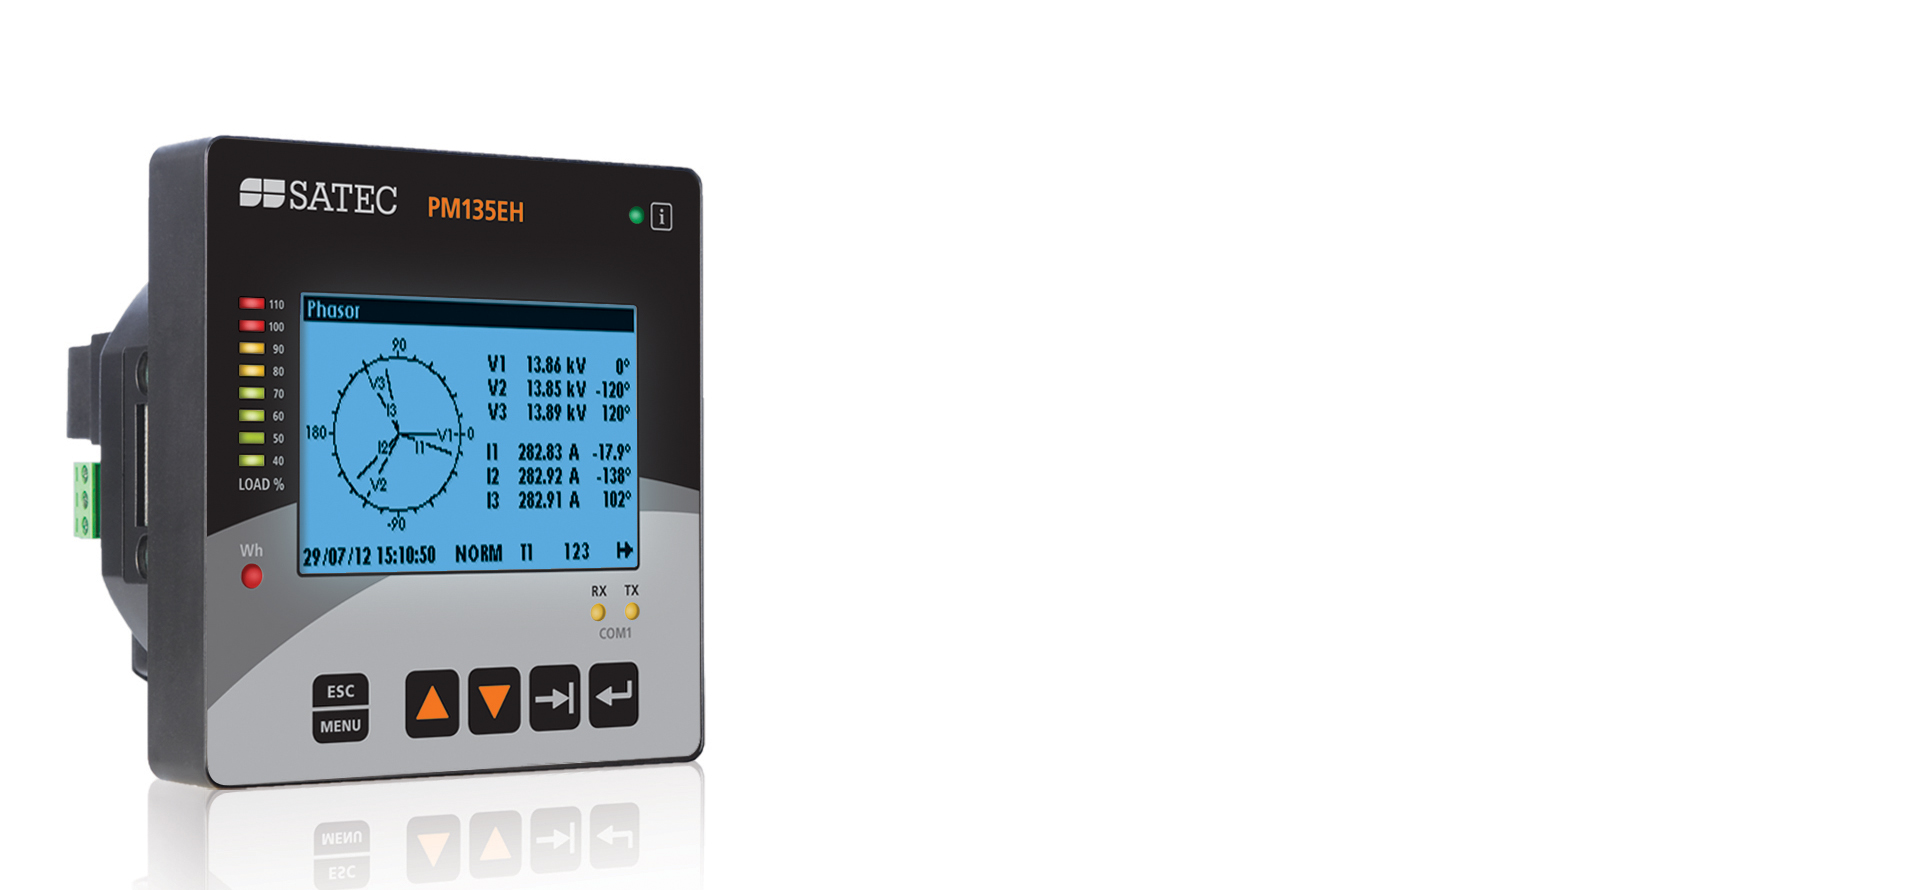 The PM130 PLUS is a multifunctional 3-phase power meter. This series provides a cost-effective substitute for numerous analog meters used by industrial, commercial and utility customers for basic power metering.